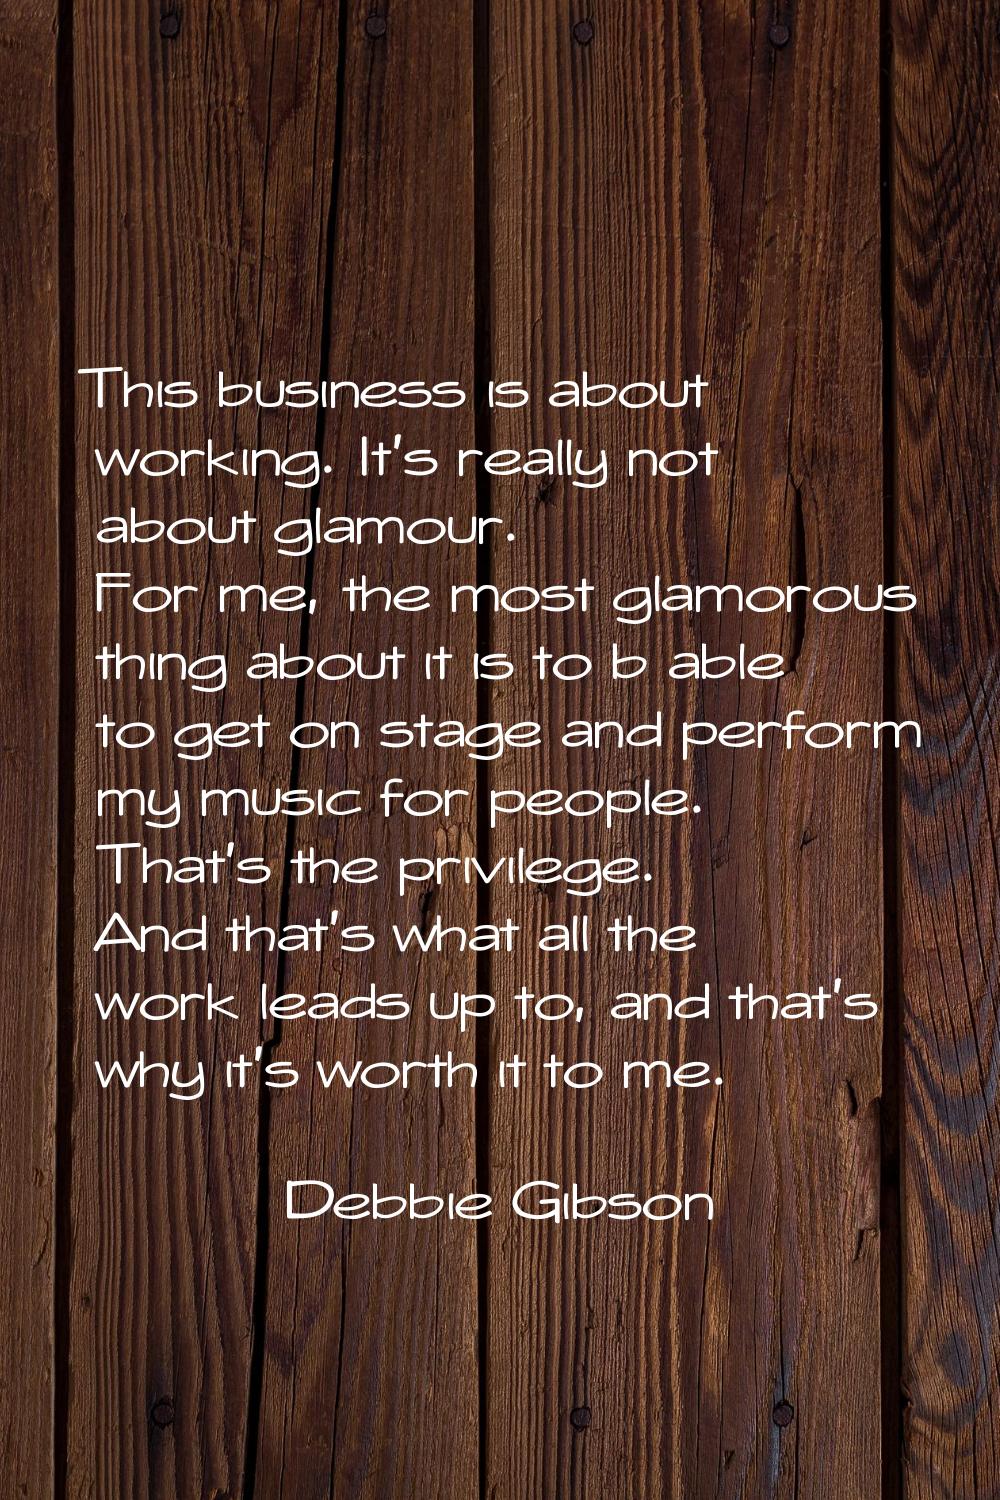 This business is about working. It's really not about glamour. For me, the most glamorous thing abo